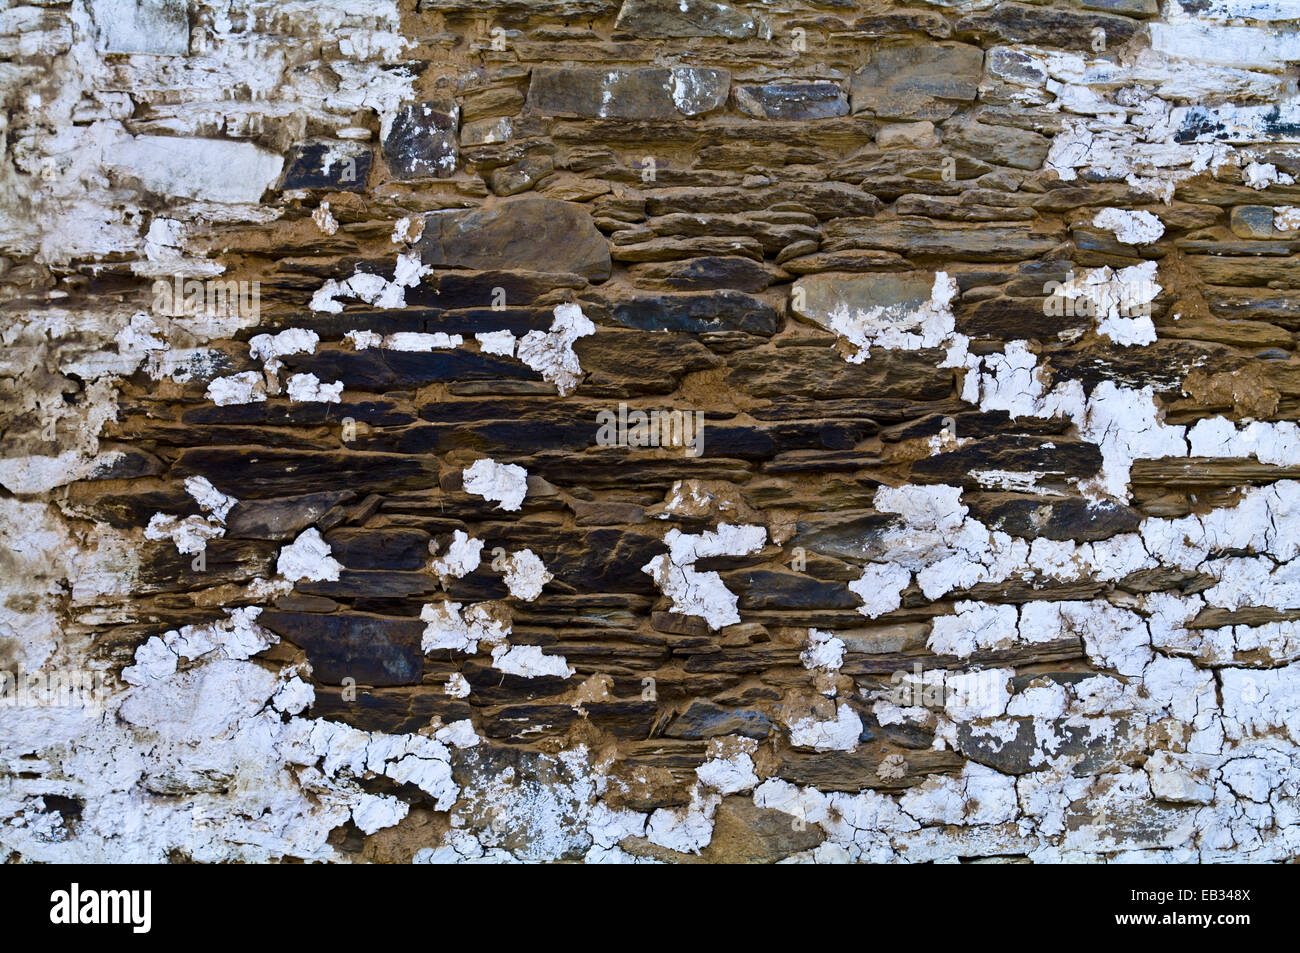 White-wash paint peeling from a weathered handmade stone tiled wall on an ancient Buddhist monastery wall. Stock Photo